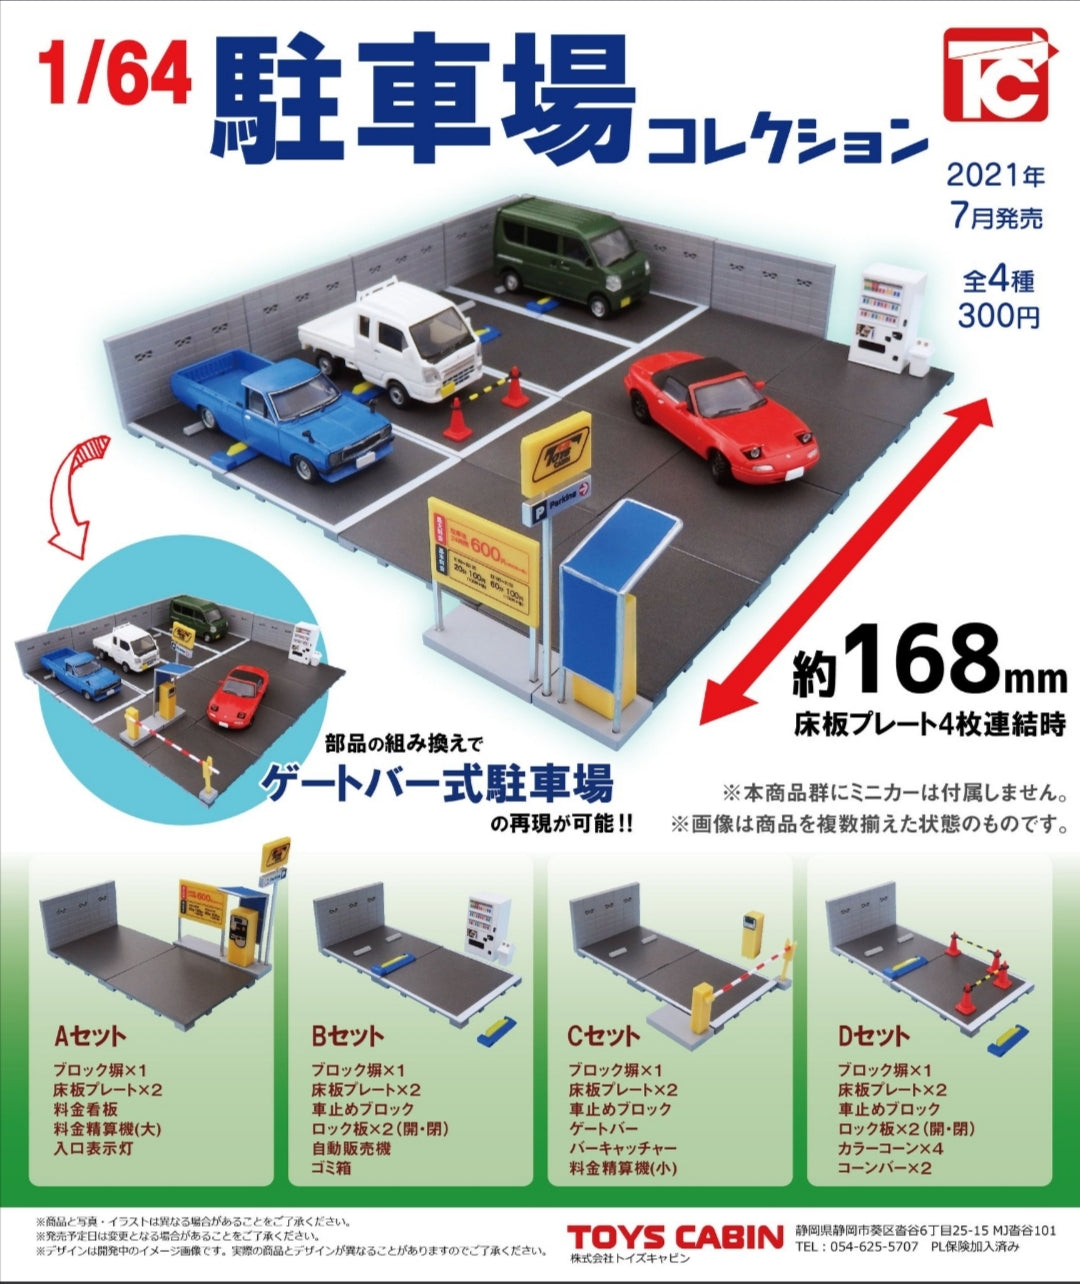 Toys Cabin Capsule Gashapon Toy Complete 1:64 Scale Japan Parking Lot set of 4 